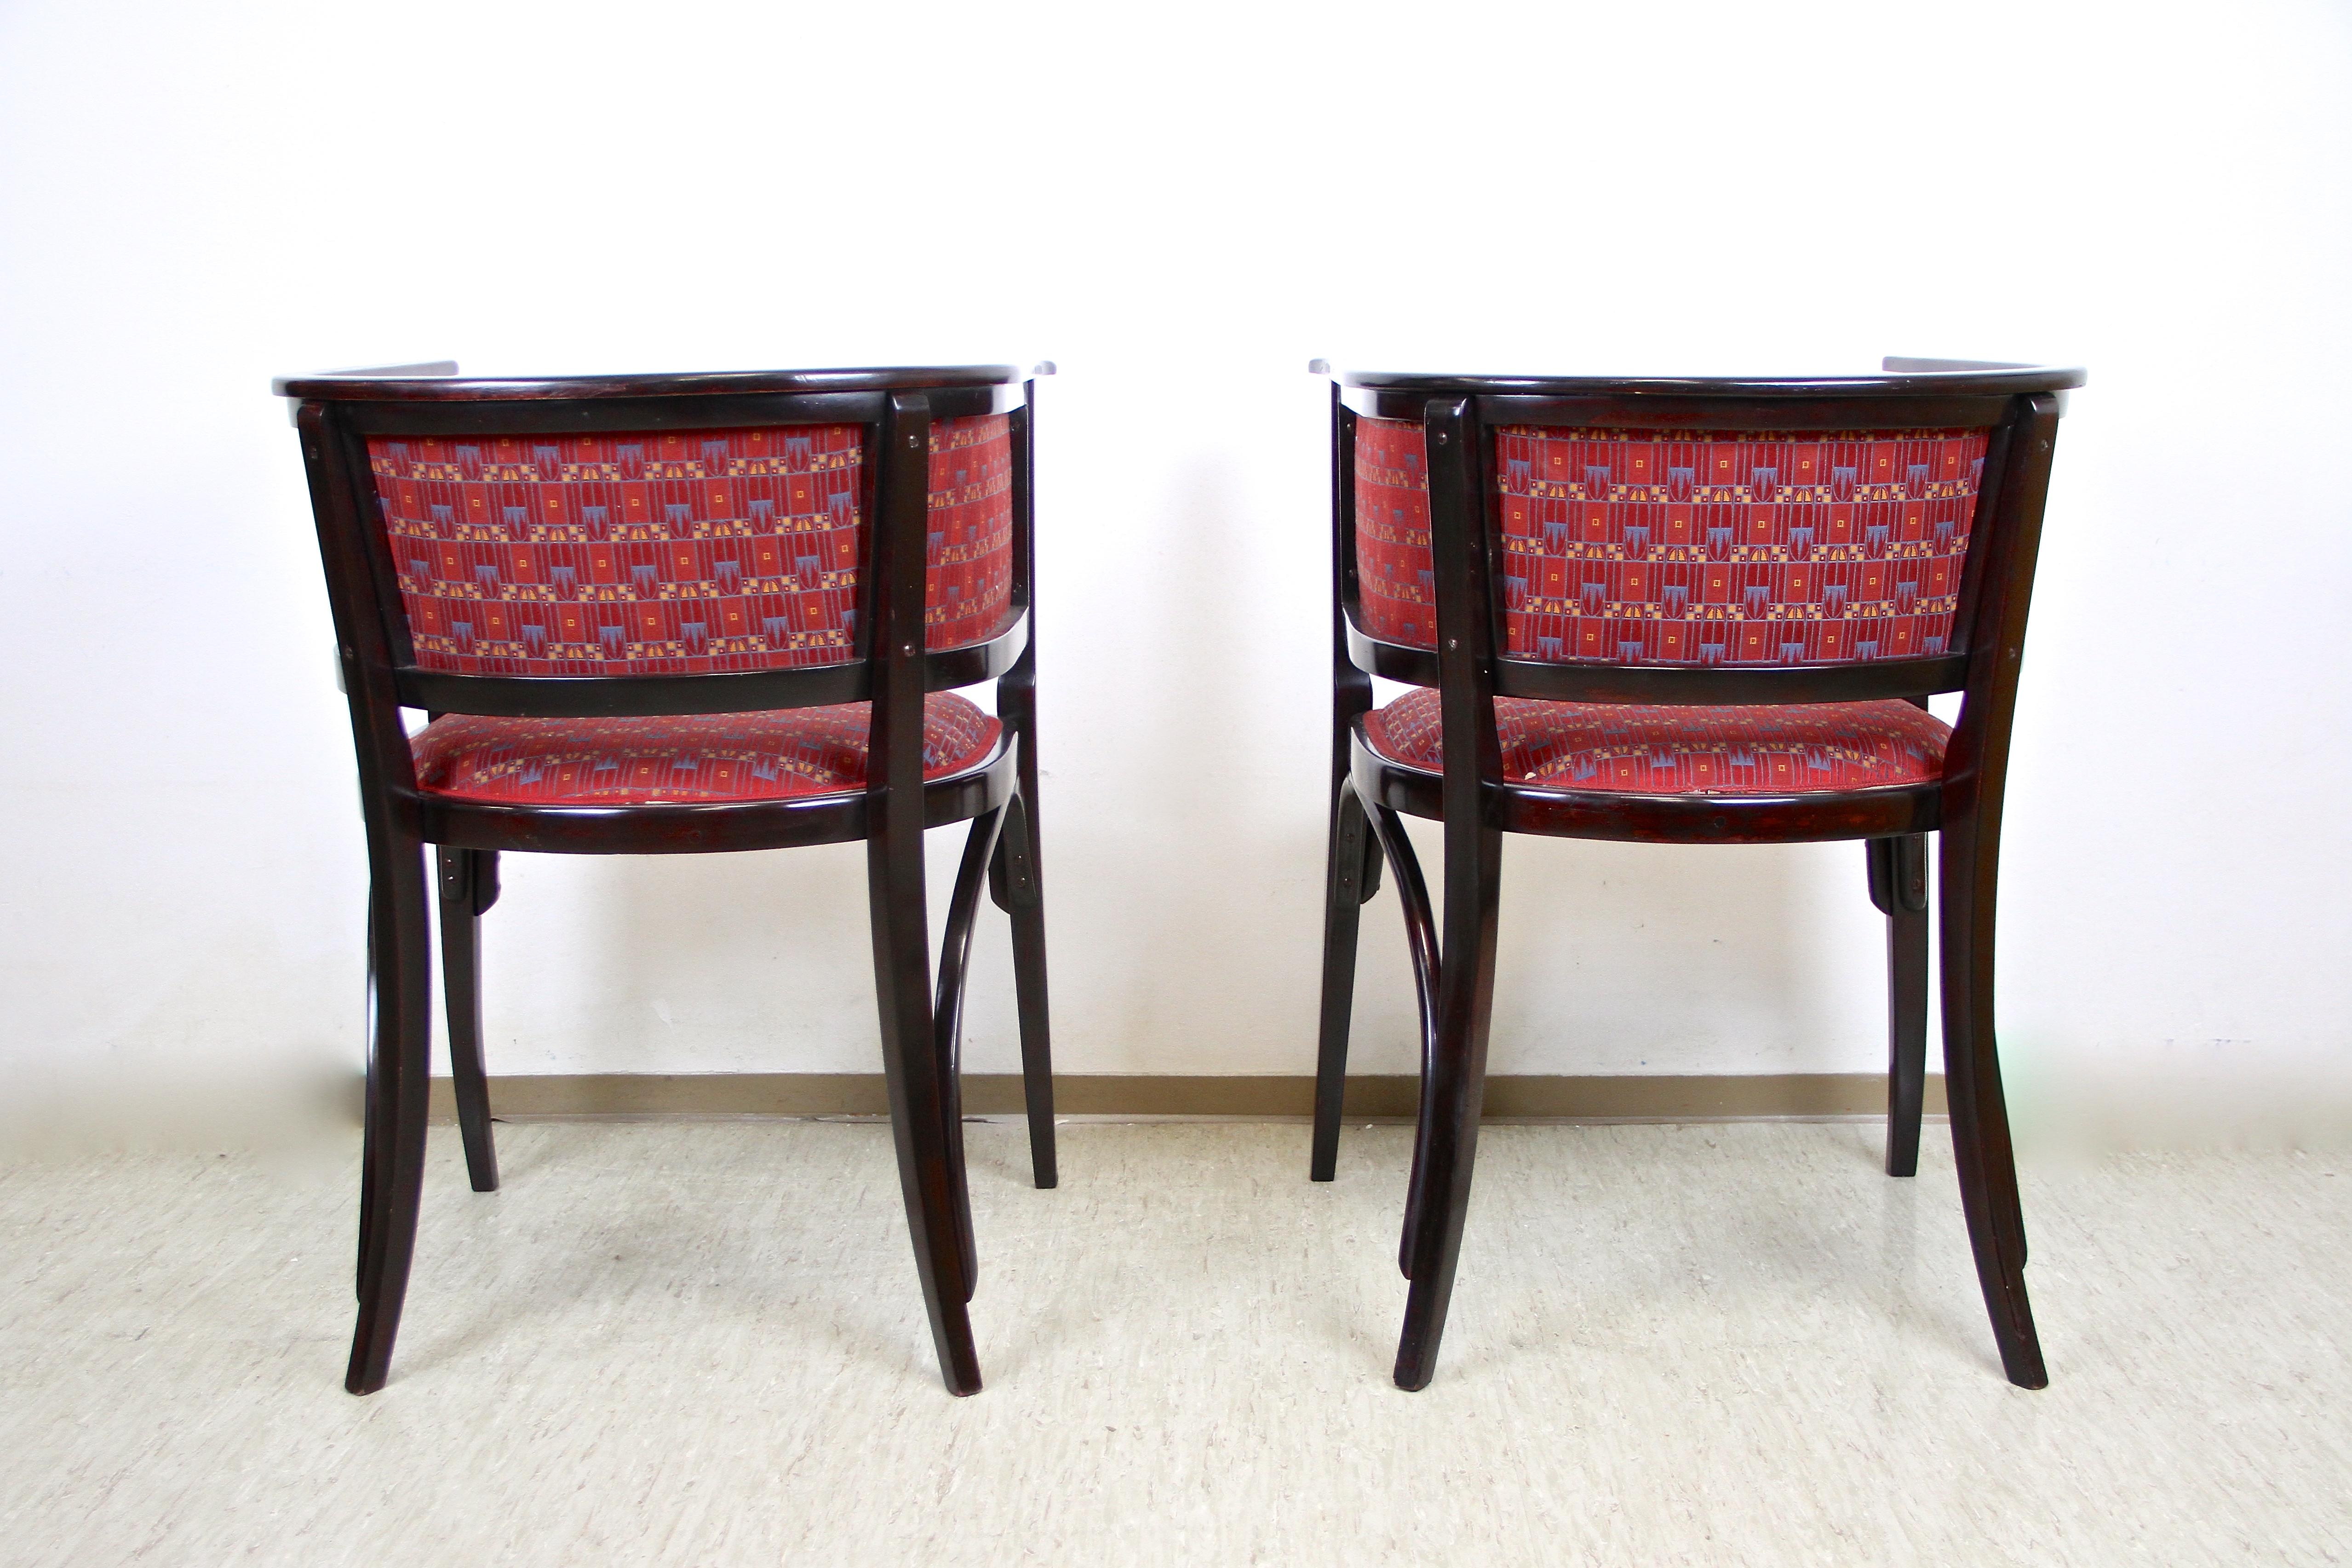 Thonet Bentwood Seating Set with Two Armchairs and Bench, Austria, circa 1910 10